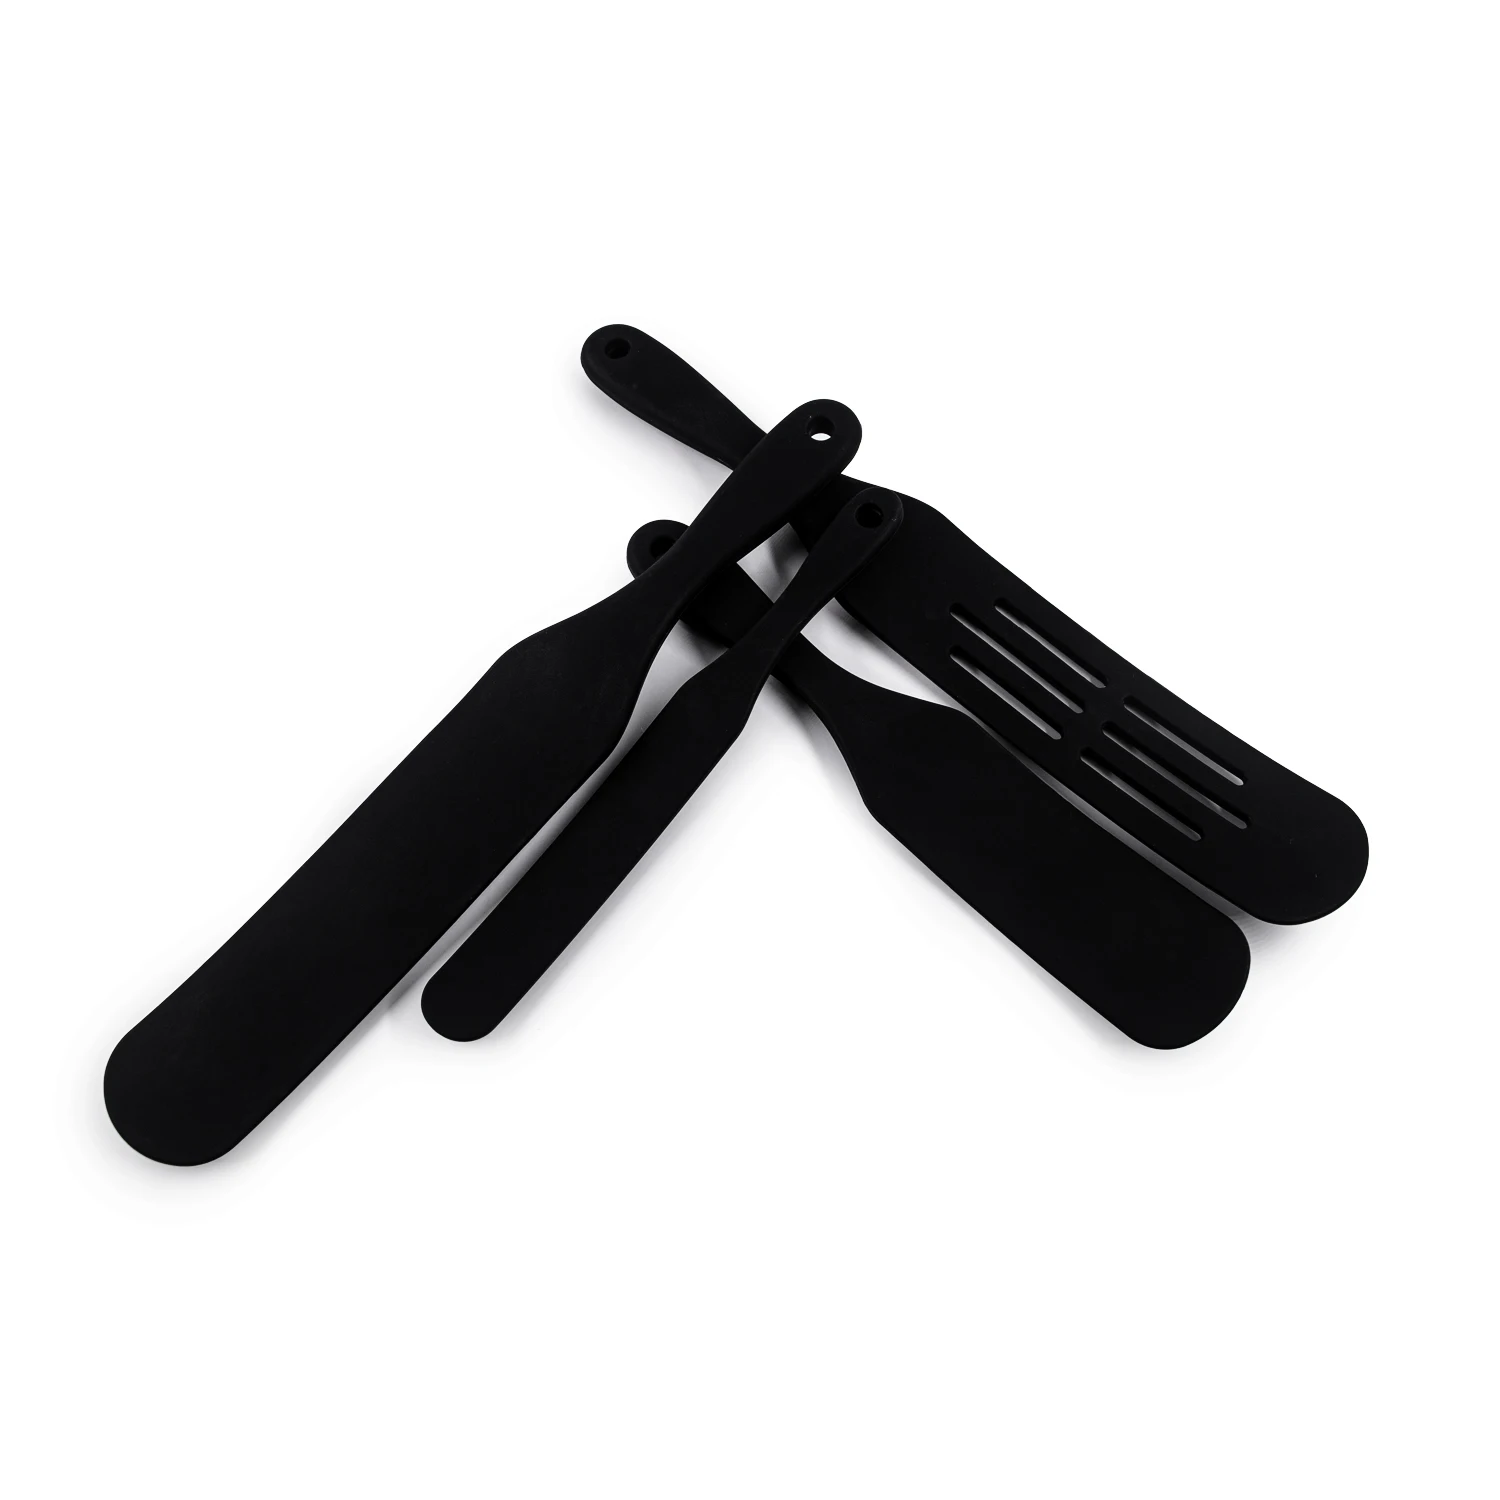 Nonstick Cookware Heat Resistant Silicone  Serving Utensils Spurtle spatula sets  for Kitchen baking cooking Tool As Seen on TV